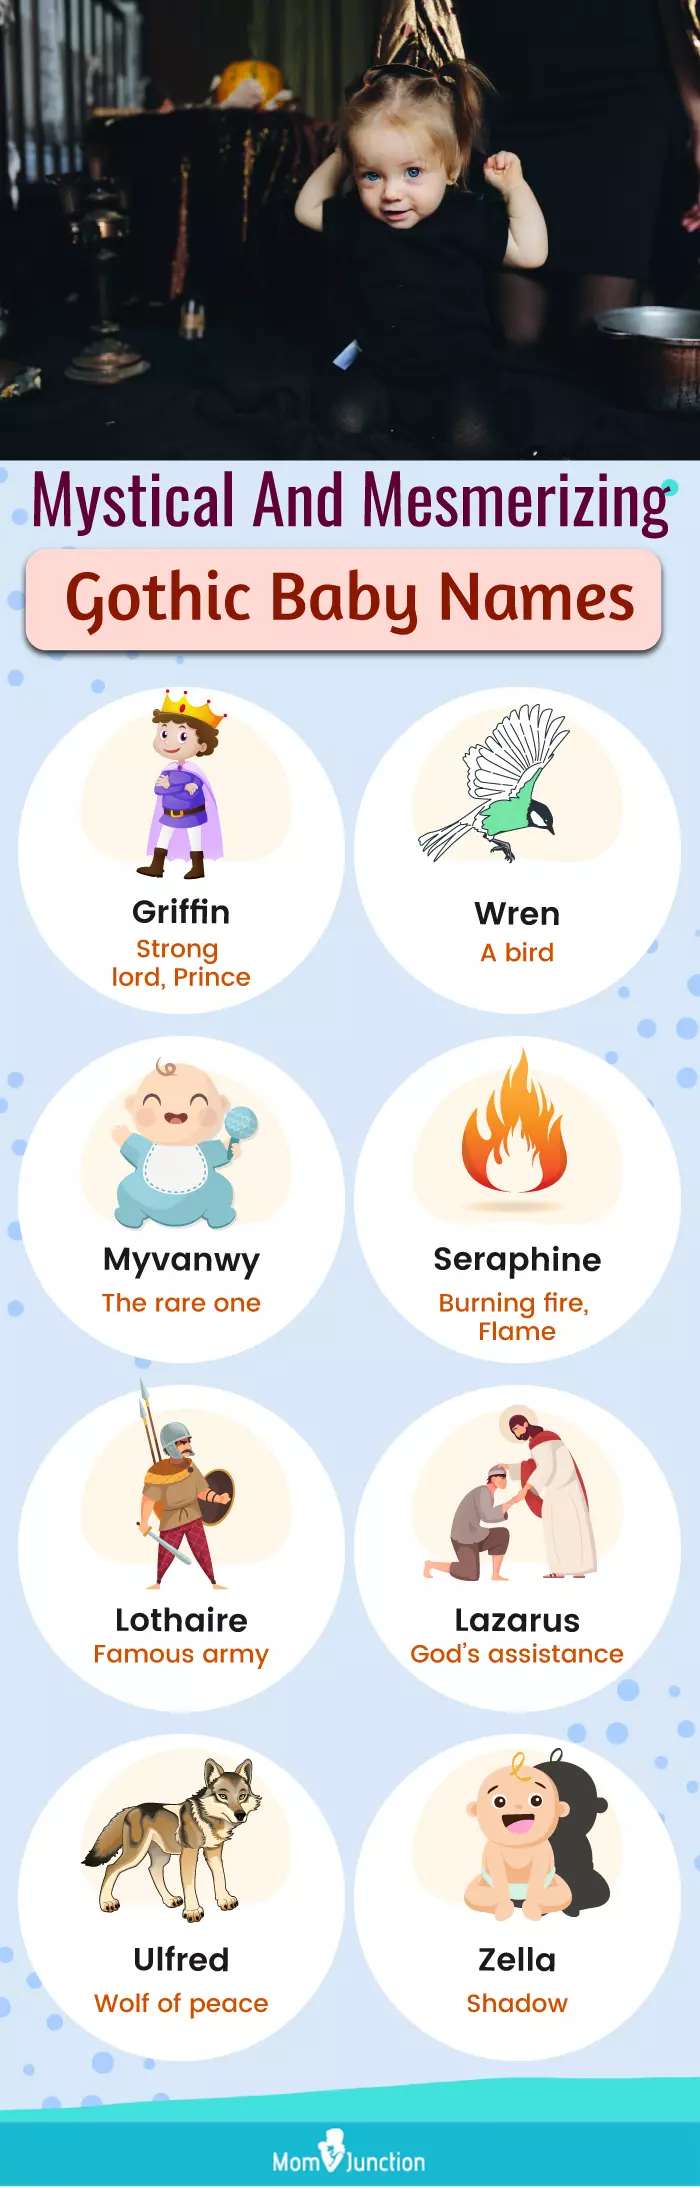 mystical and mesmerizing gothic baby names (infographic)